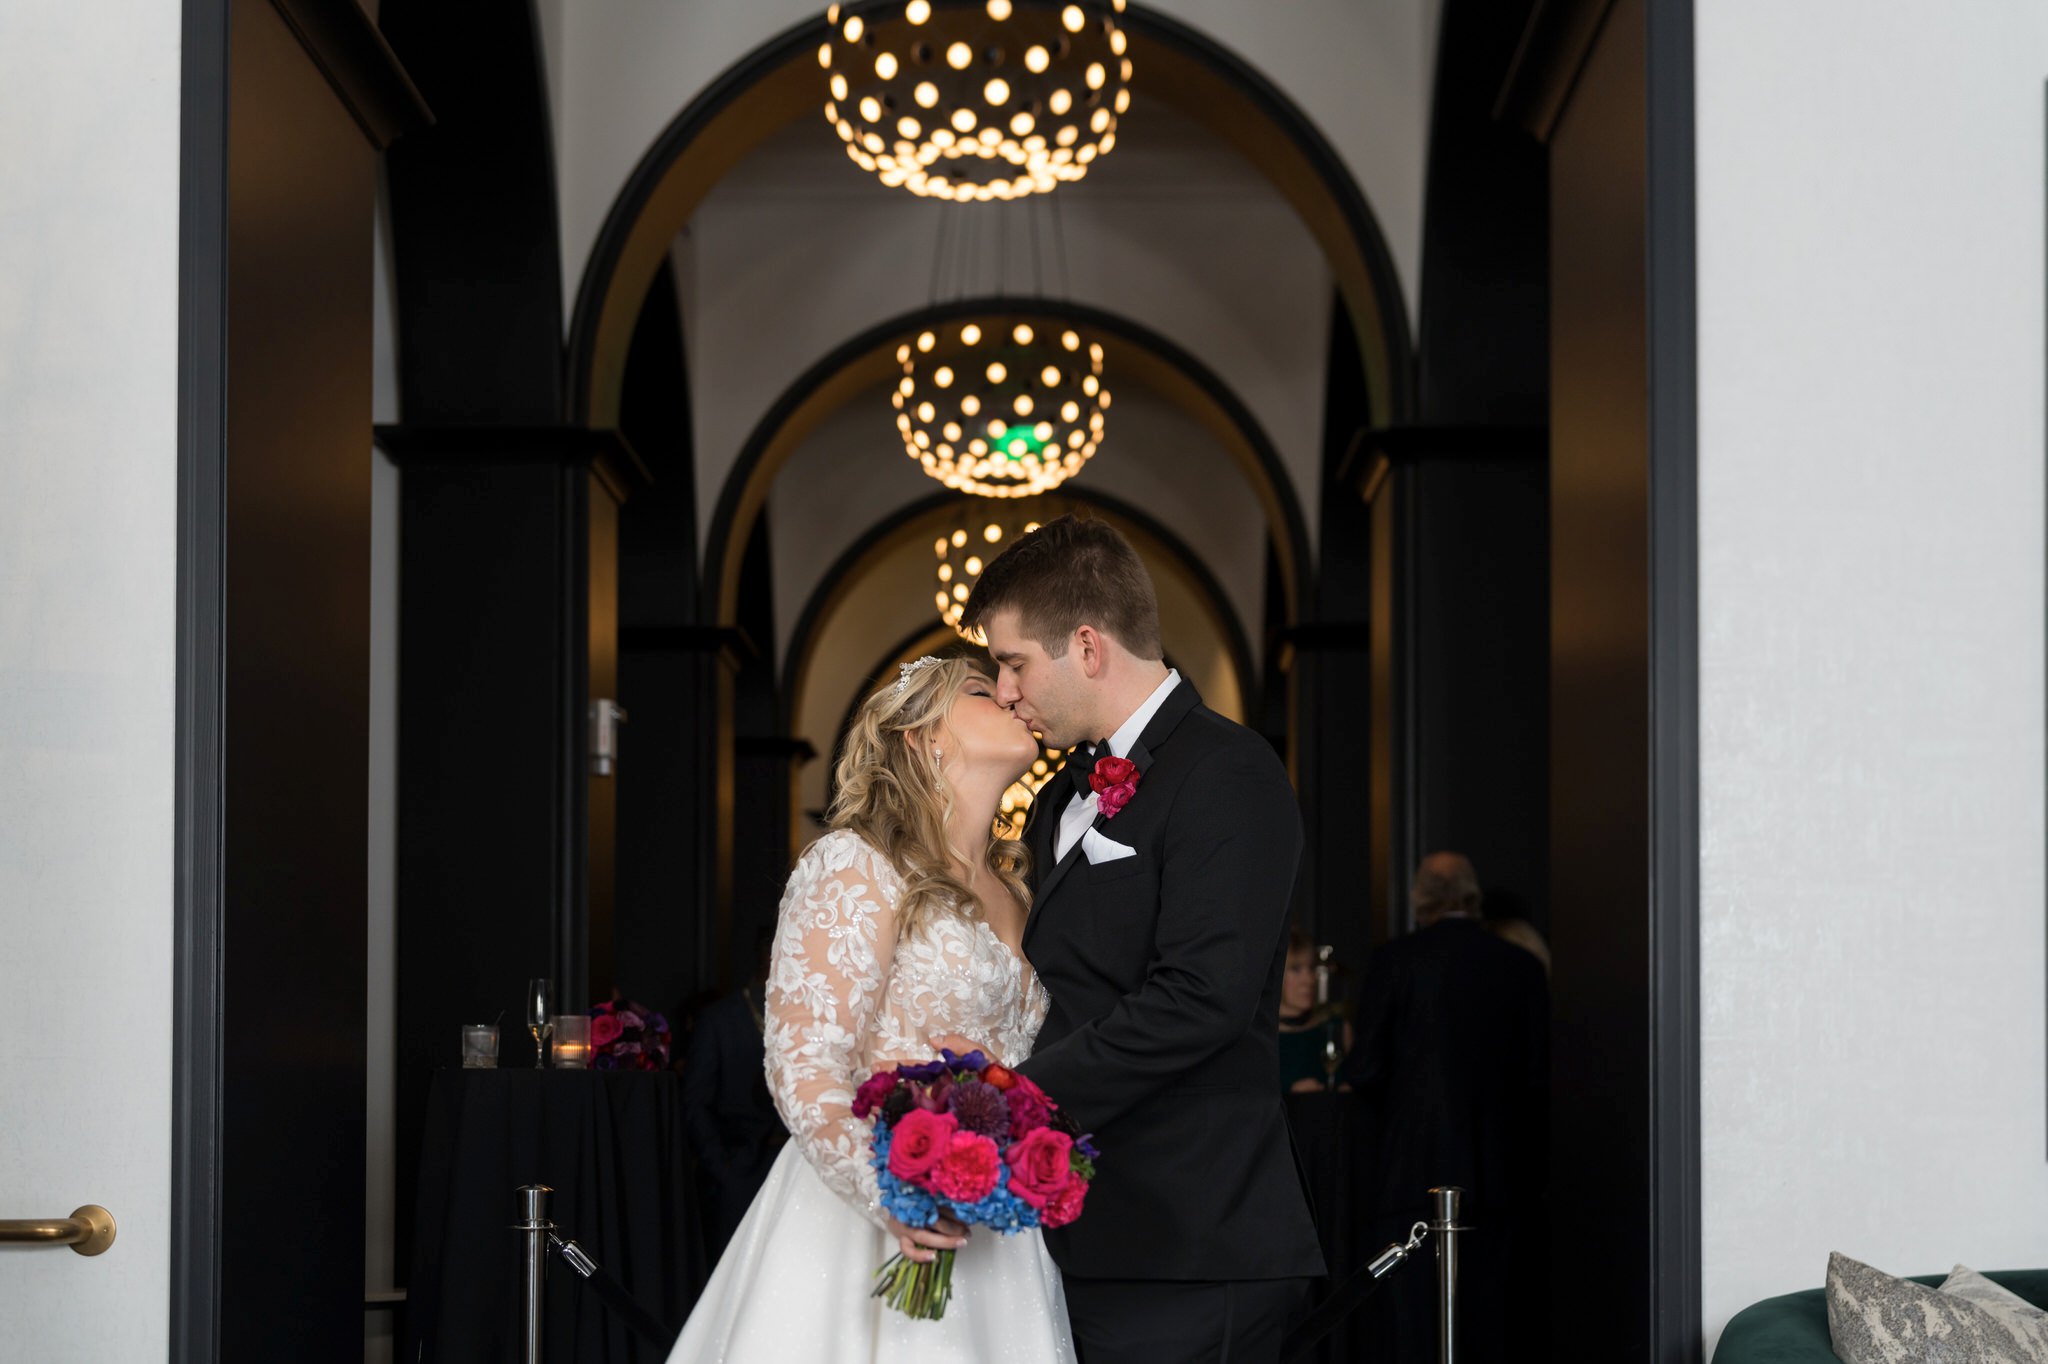 A groom kisses the bride with golden chandeliers behind them at their Daxton Hotel wedding.  